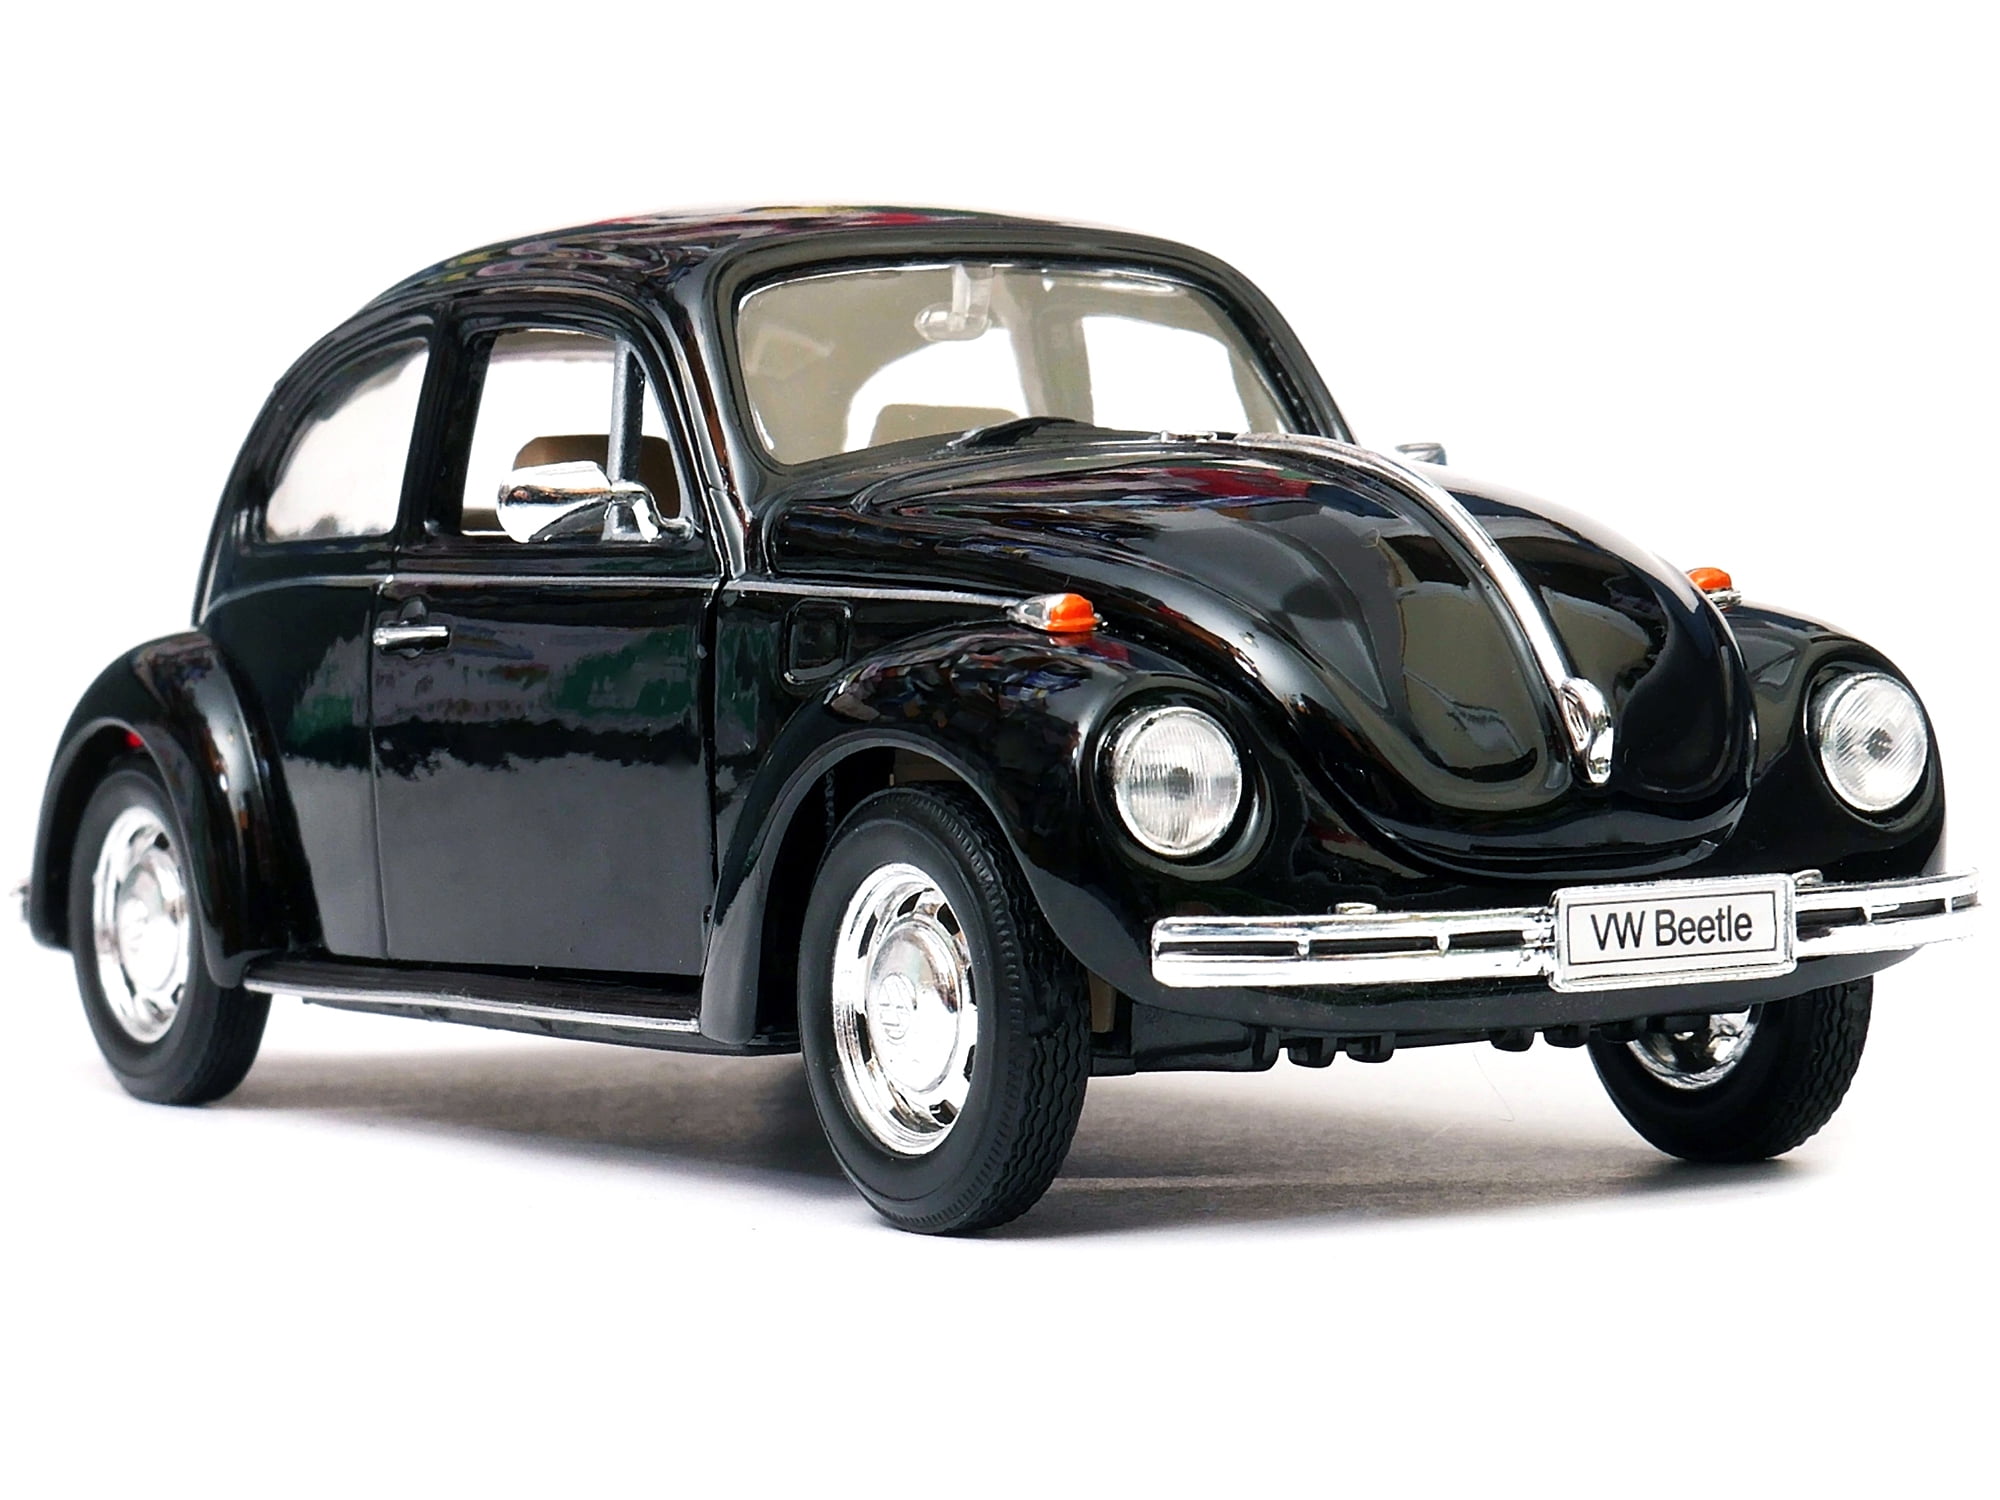 7.5” PERSONALISED VOLKSWAGON VW BEETLE CAR BIRTHDAY CAKE TOPPERS ON RICE PAPER